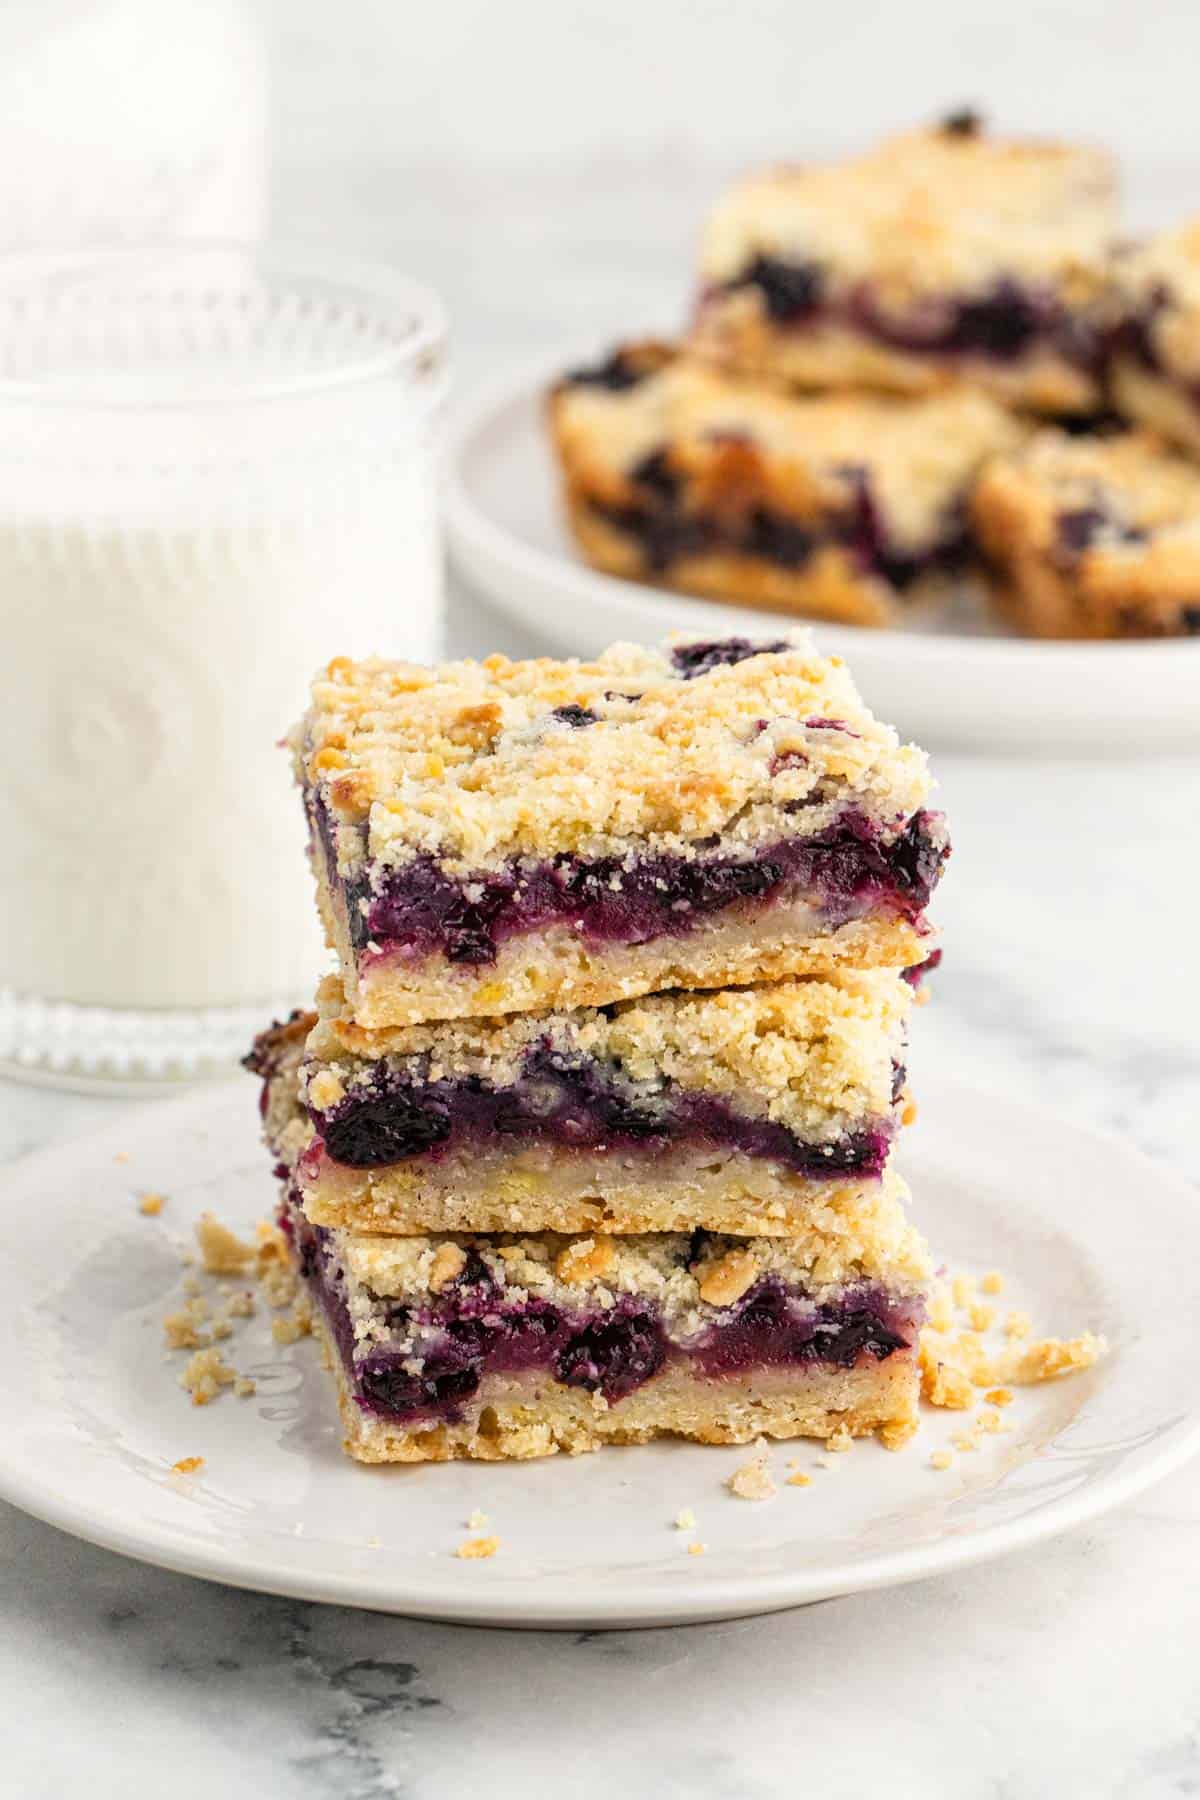 A stack of blueberry crumble bars on a plate with a glass of milk behind and a platter of more bars.